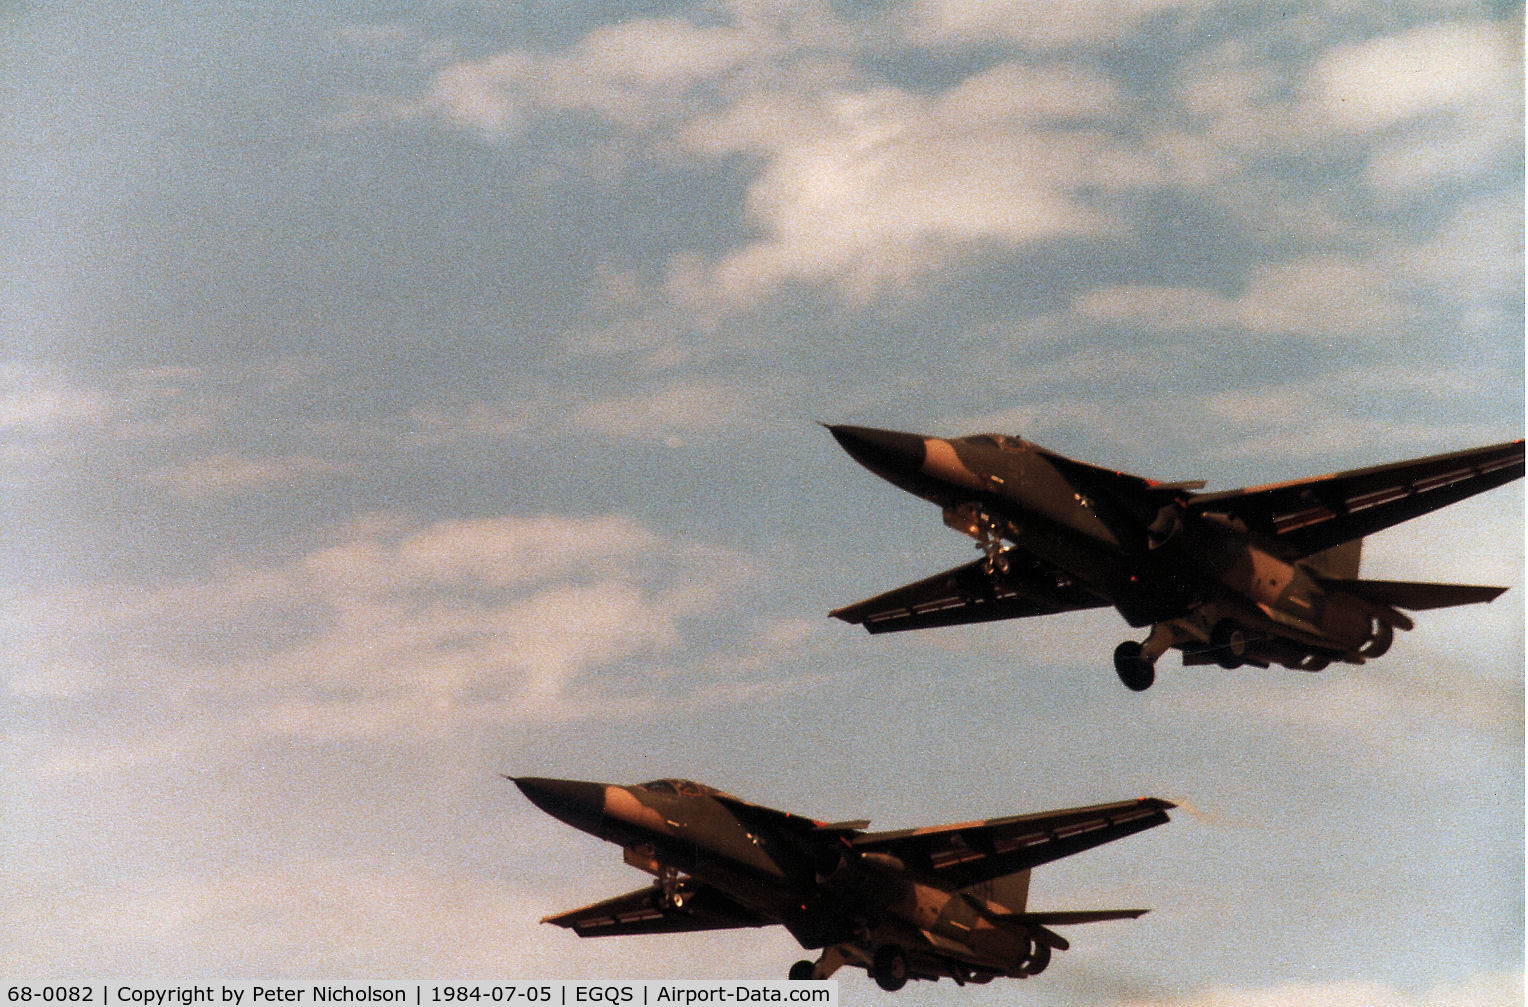 68-0082, 1968 General Dynamics F-111E Aardvark C/N A1-251, F-111E of 55th Tactical Fighter Squadron/20th Tactical Fighter Wing at RAF Upper Heyford on a paired practice approach wth 68-0074 at RAF Lossiemouth in the Summer of 1984.